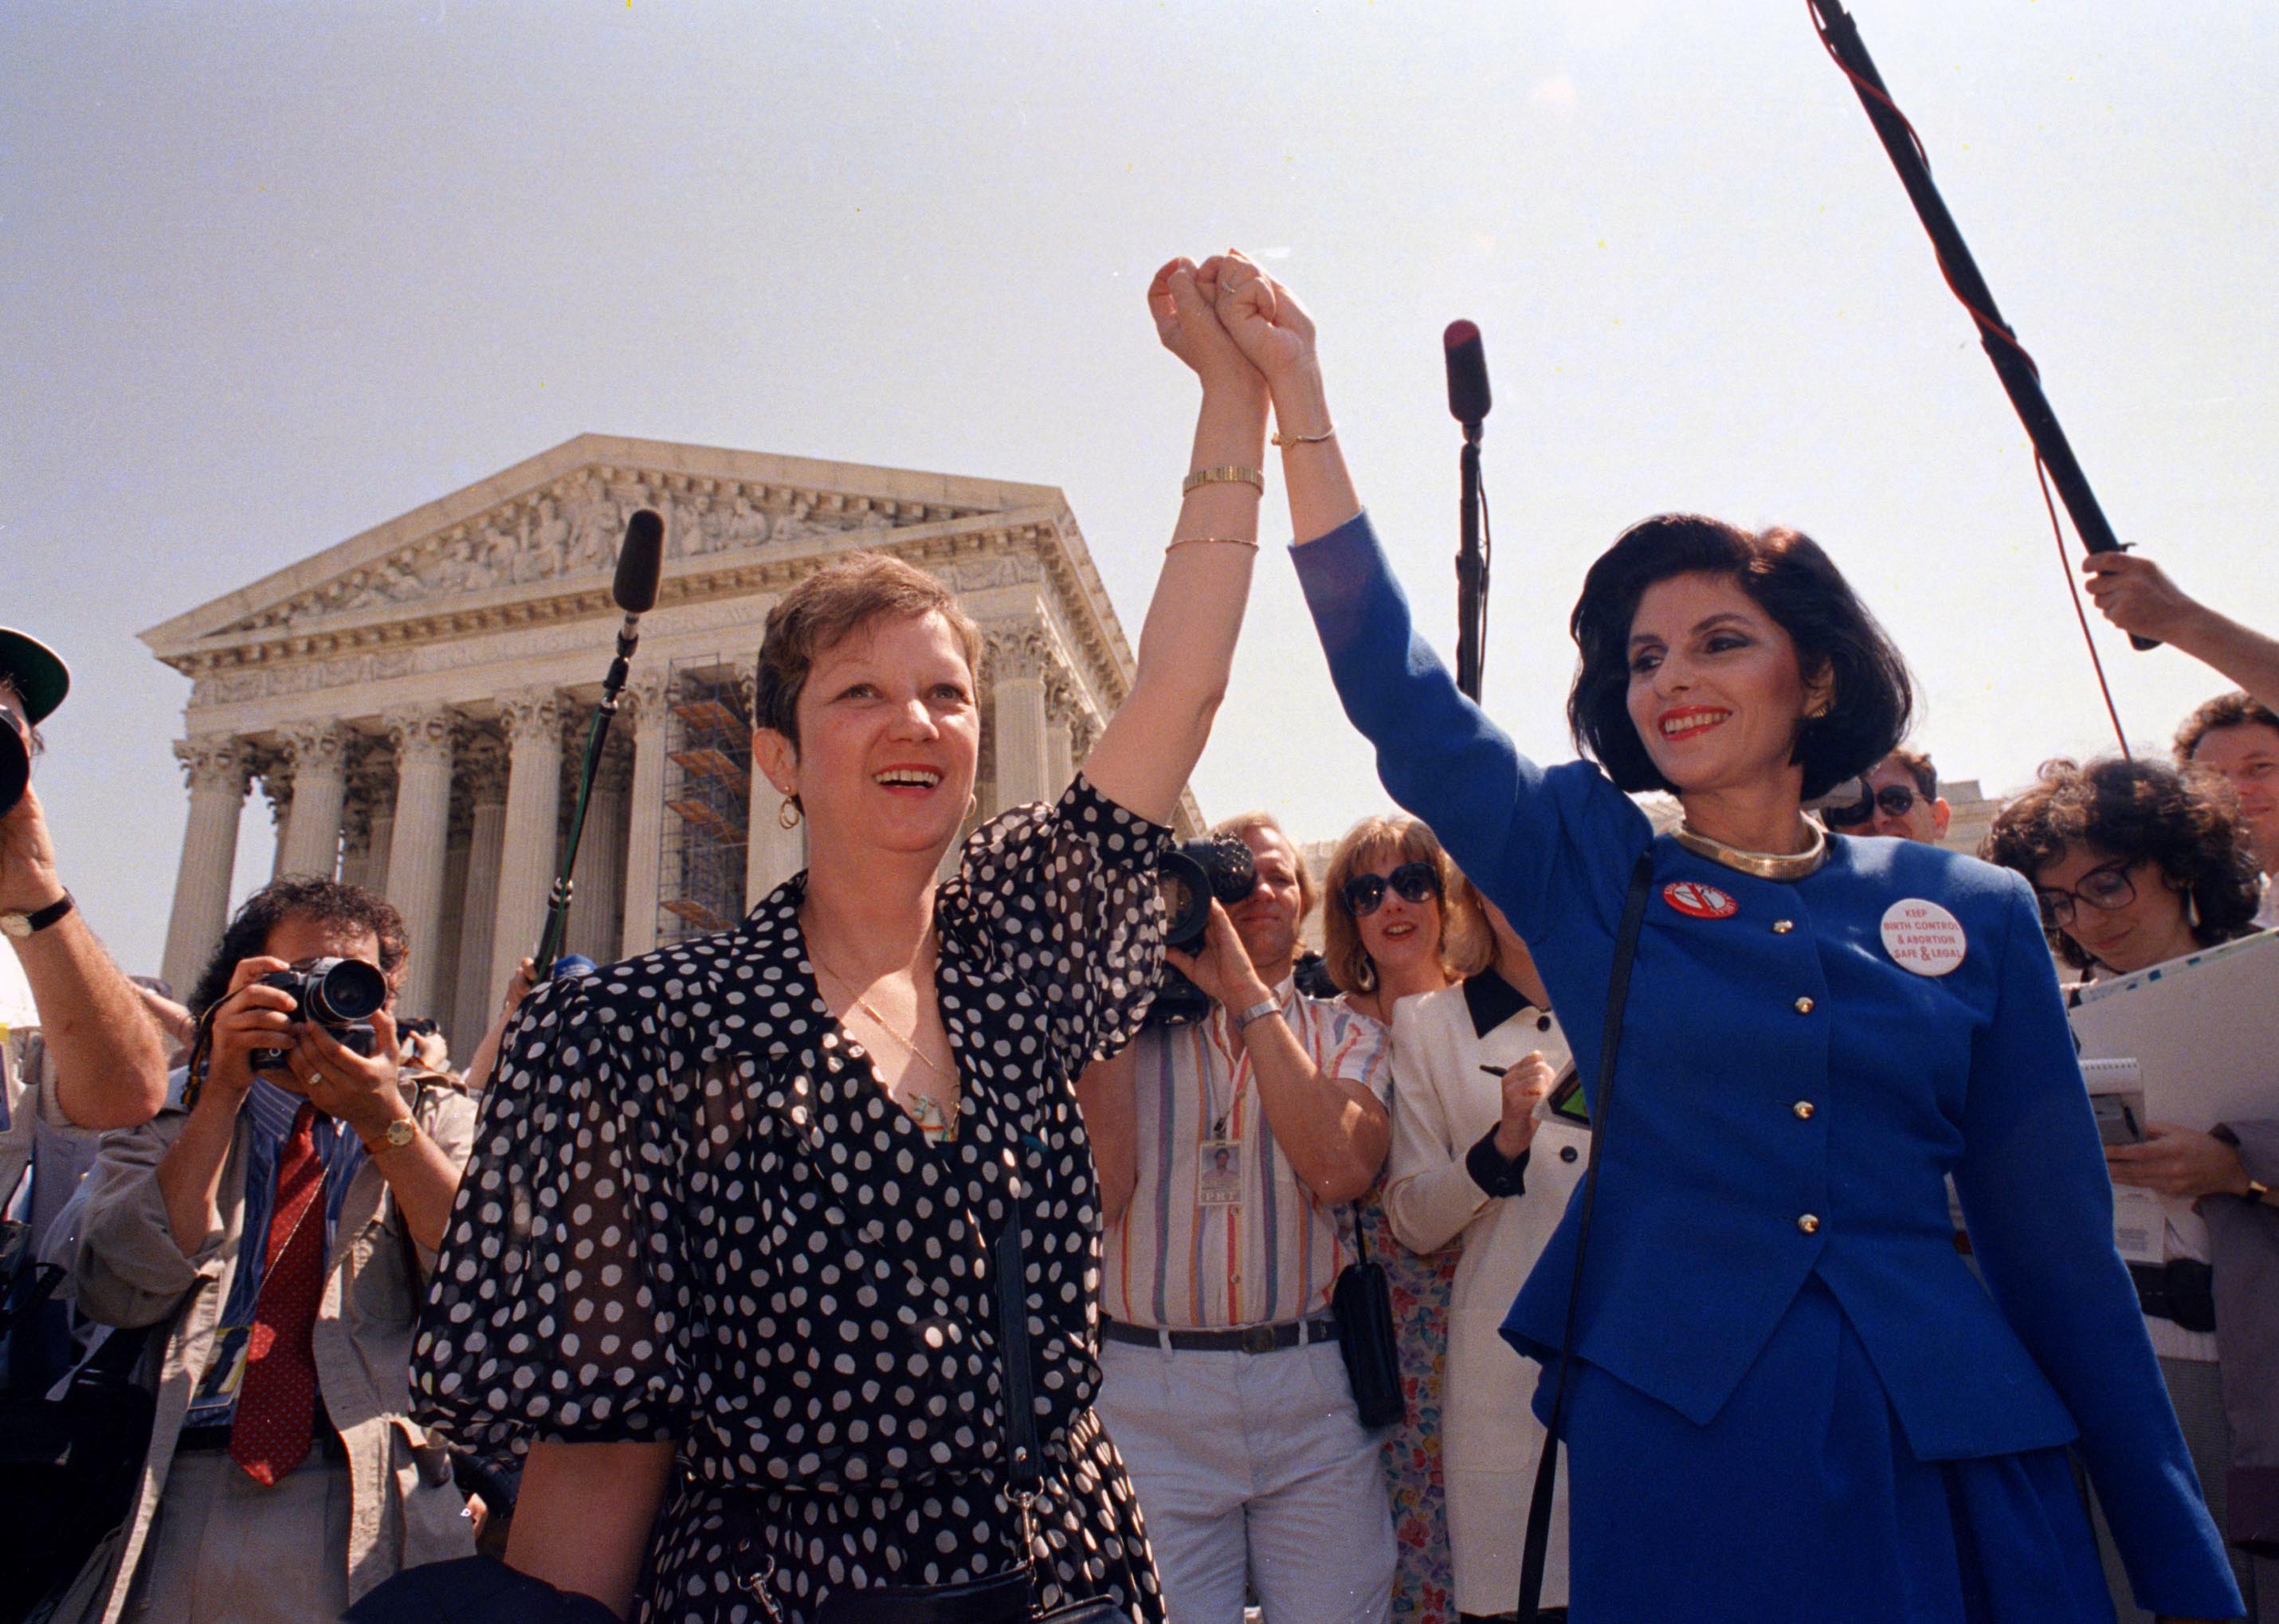 Norma McCorvey, Jane Roe in the 1973 court case, left, and her attorney Gloria Allred hold hands as they leave the Supreme Court building in Washington, DC., on April 26, 1989. (J. Scott Applewhite—AP)